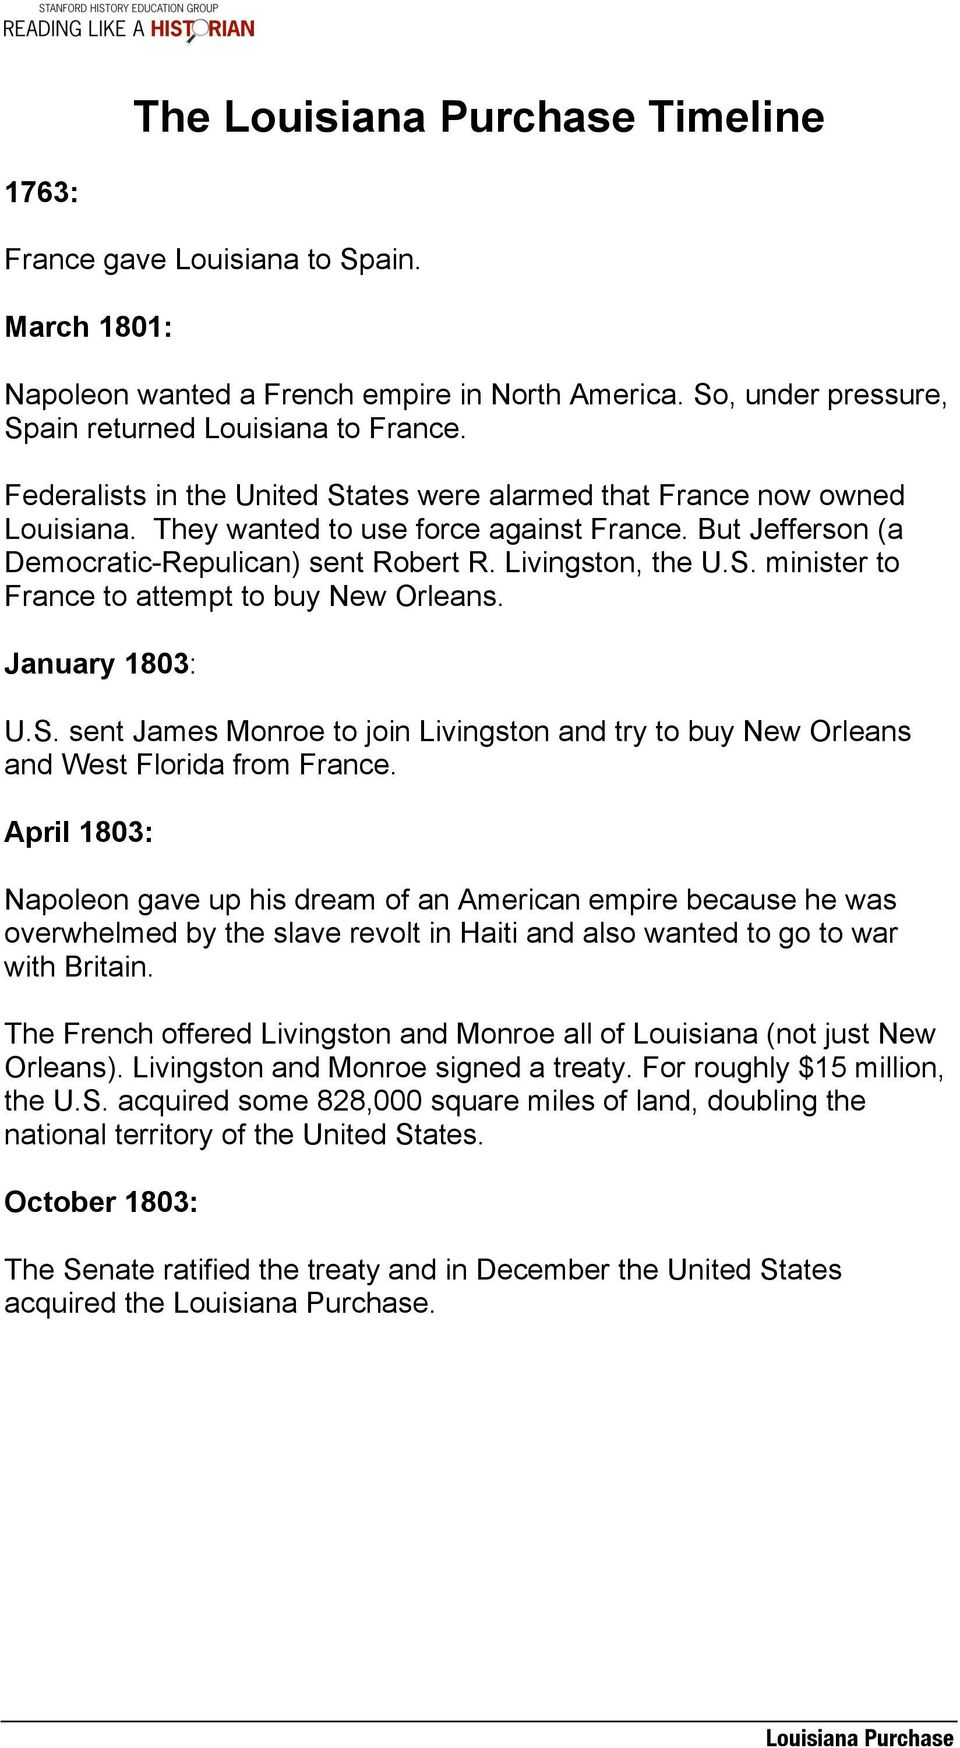 January 1803: U.S. sent James Monroe to join Livingston and try to buy New Orleans and West Florida from France.